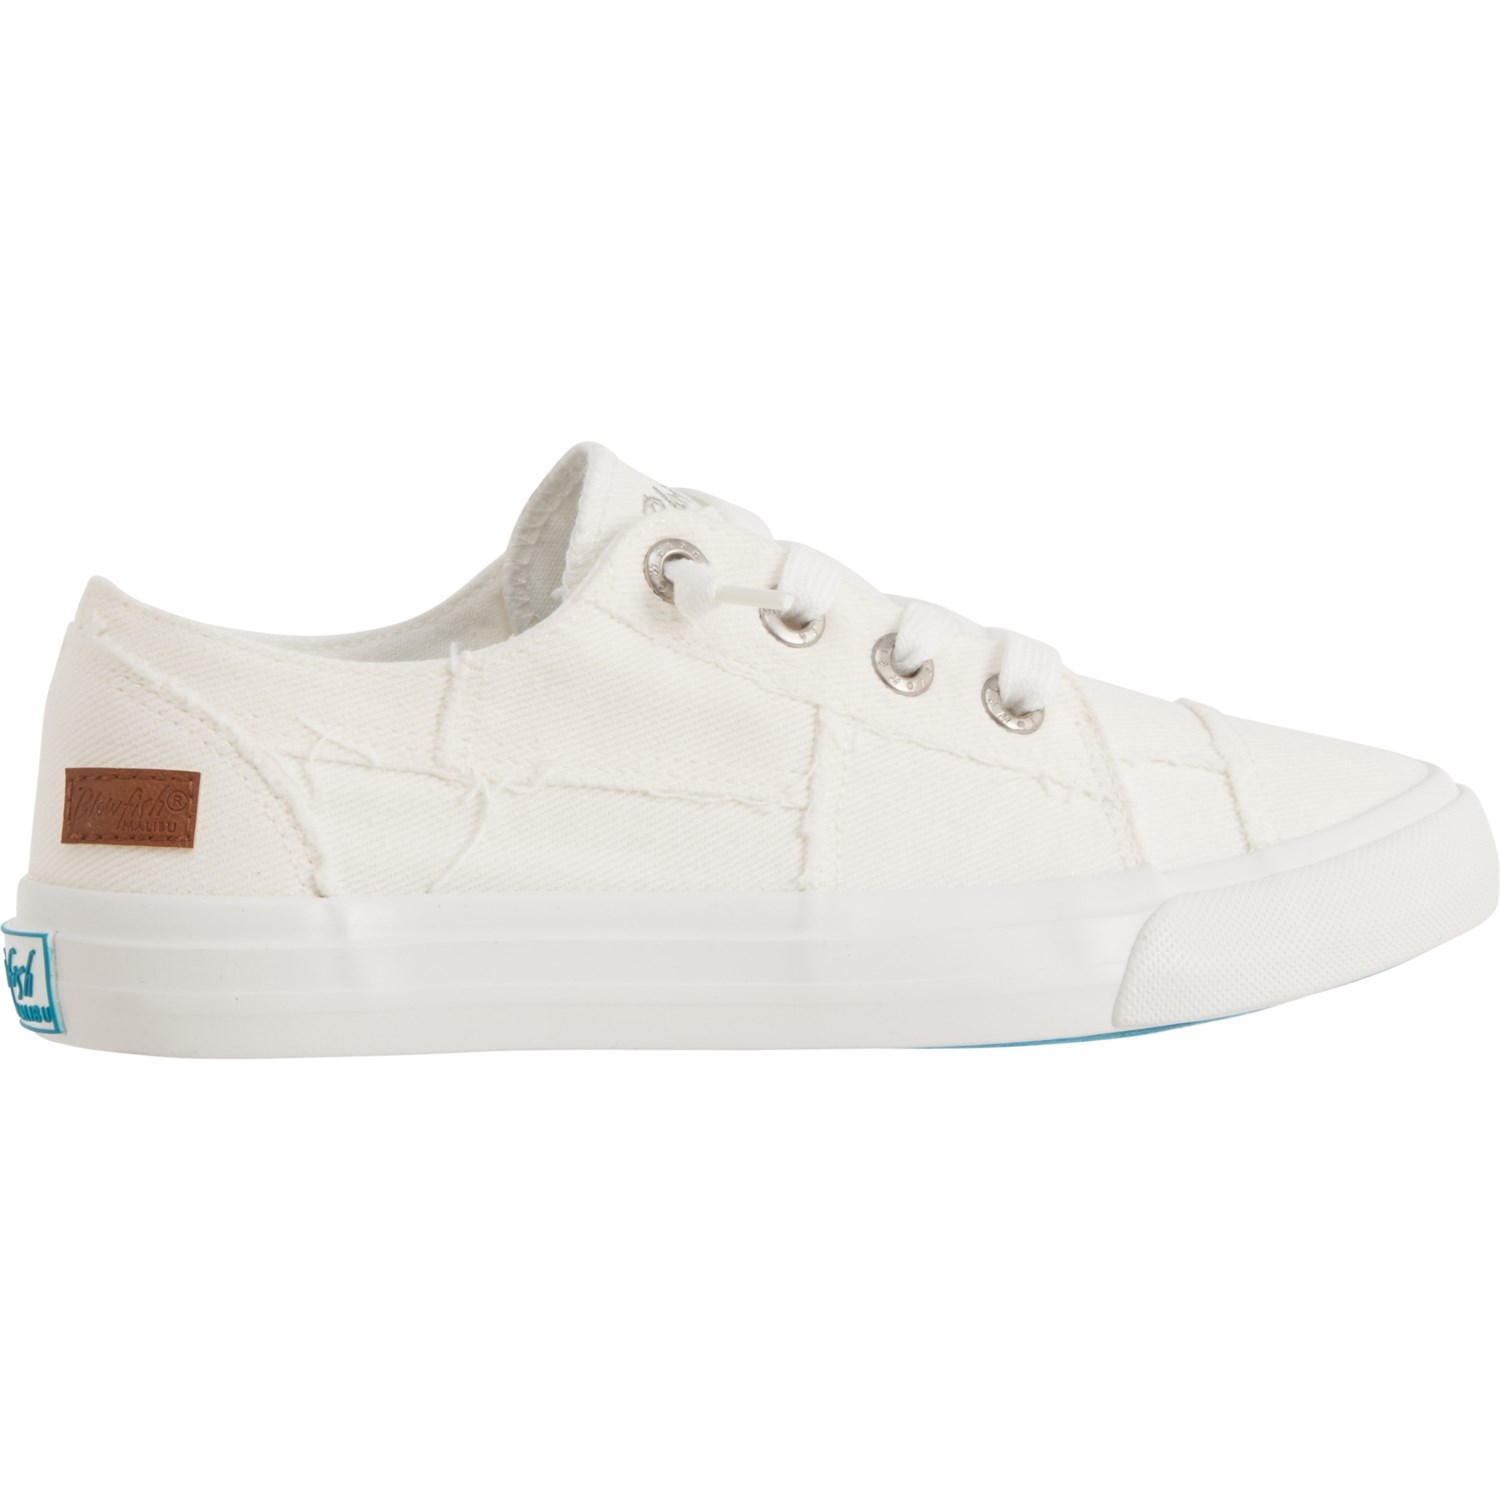 Blowfish Maxine Sneakers (For Women) - Save 46%